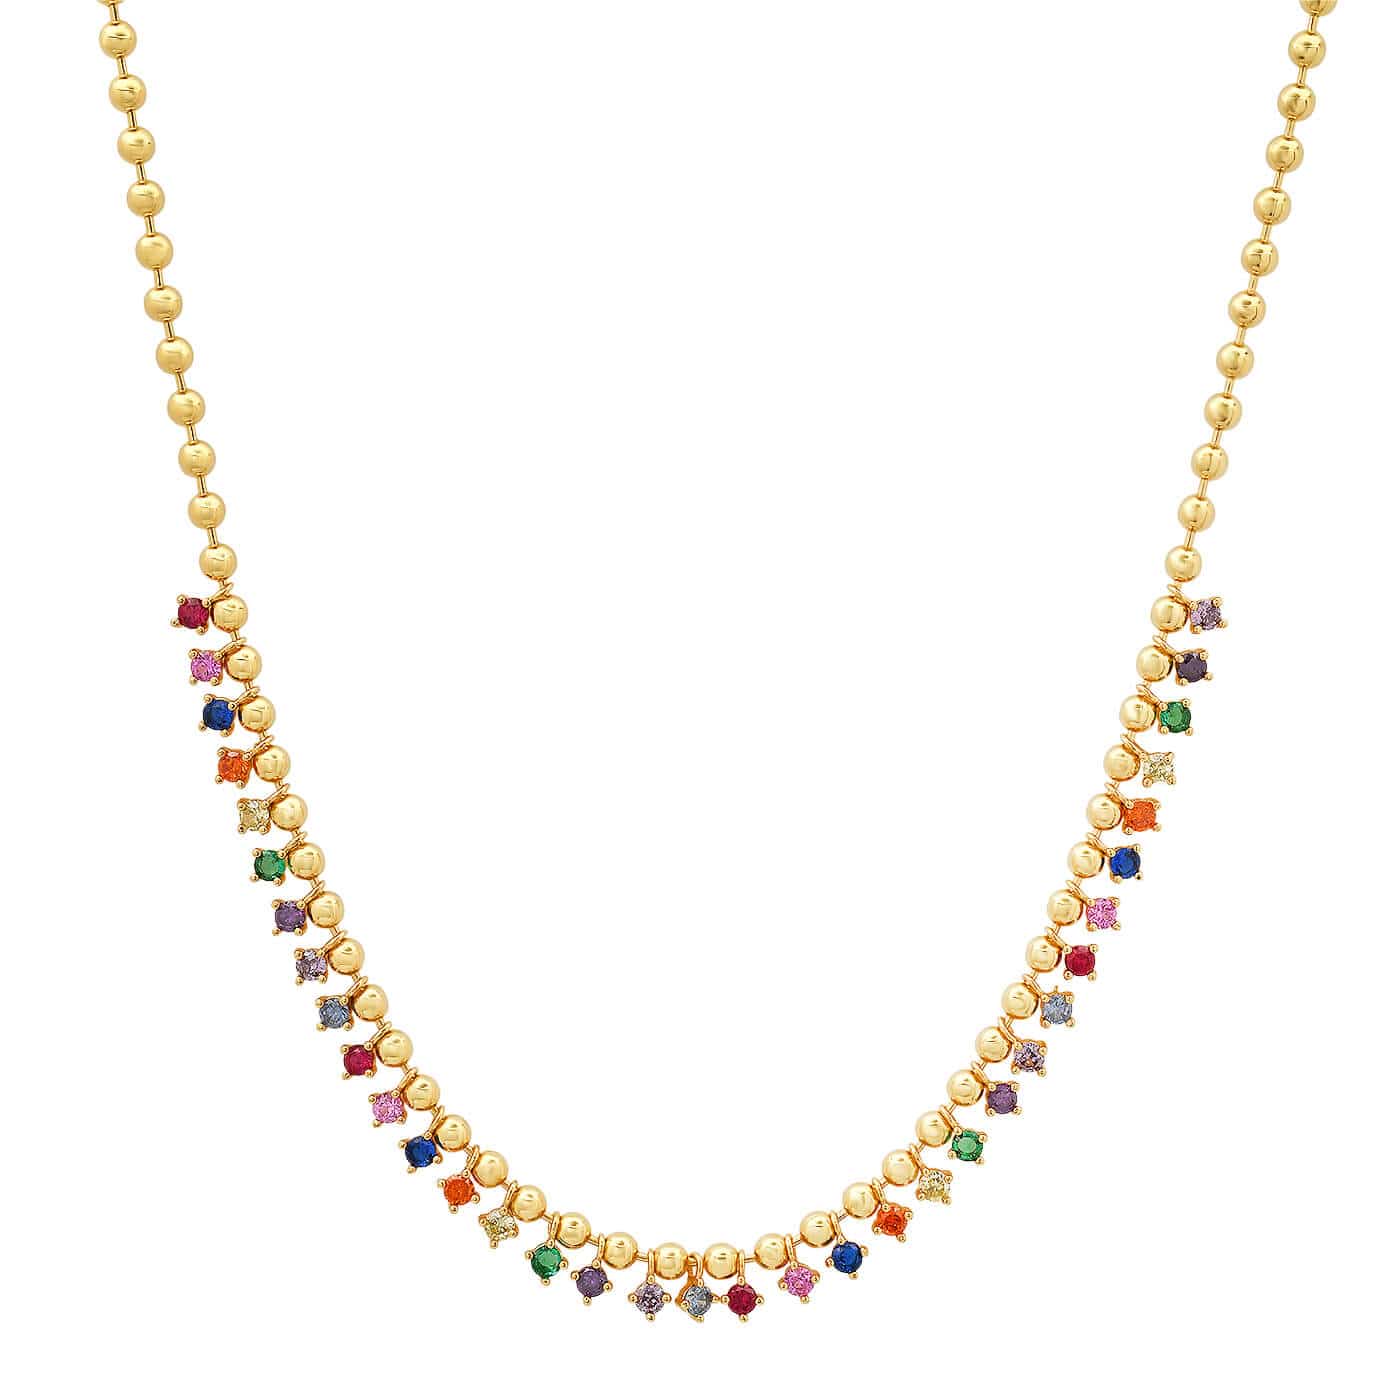 TAI JEWELRY Necklace Gold Ball Necklace with Graduated Rainbow CZ Stones